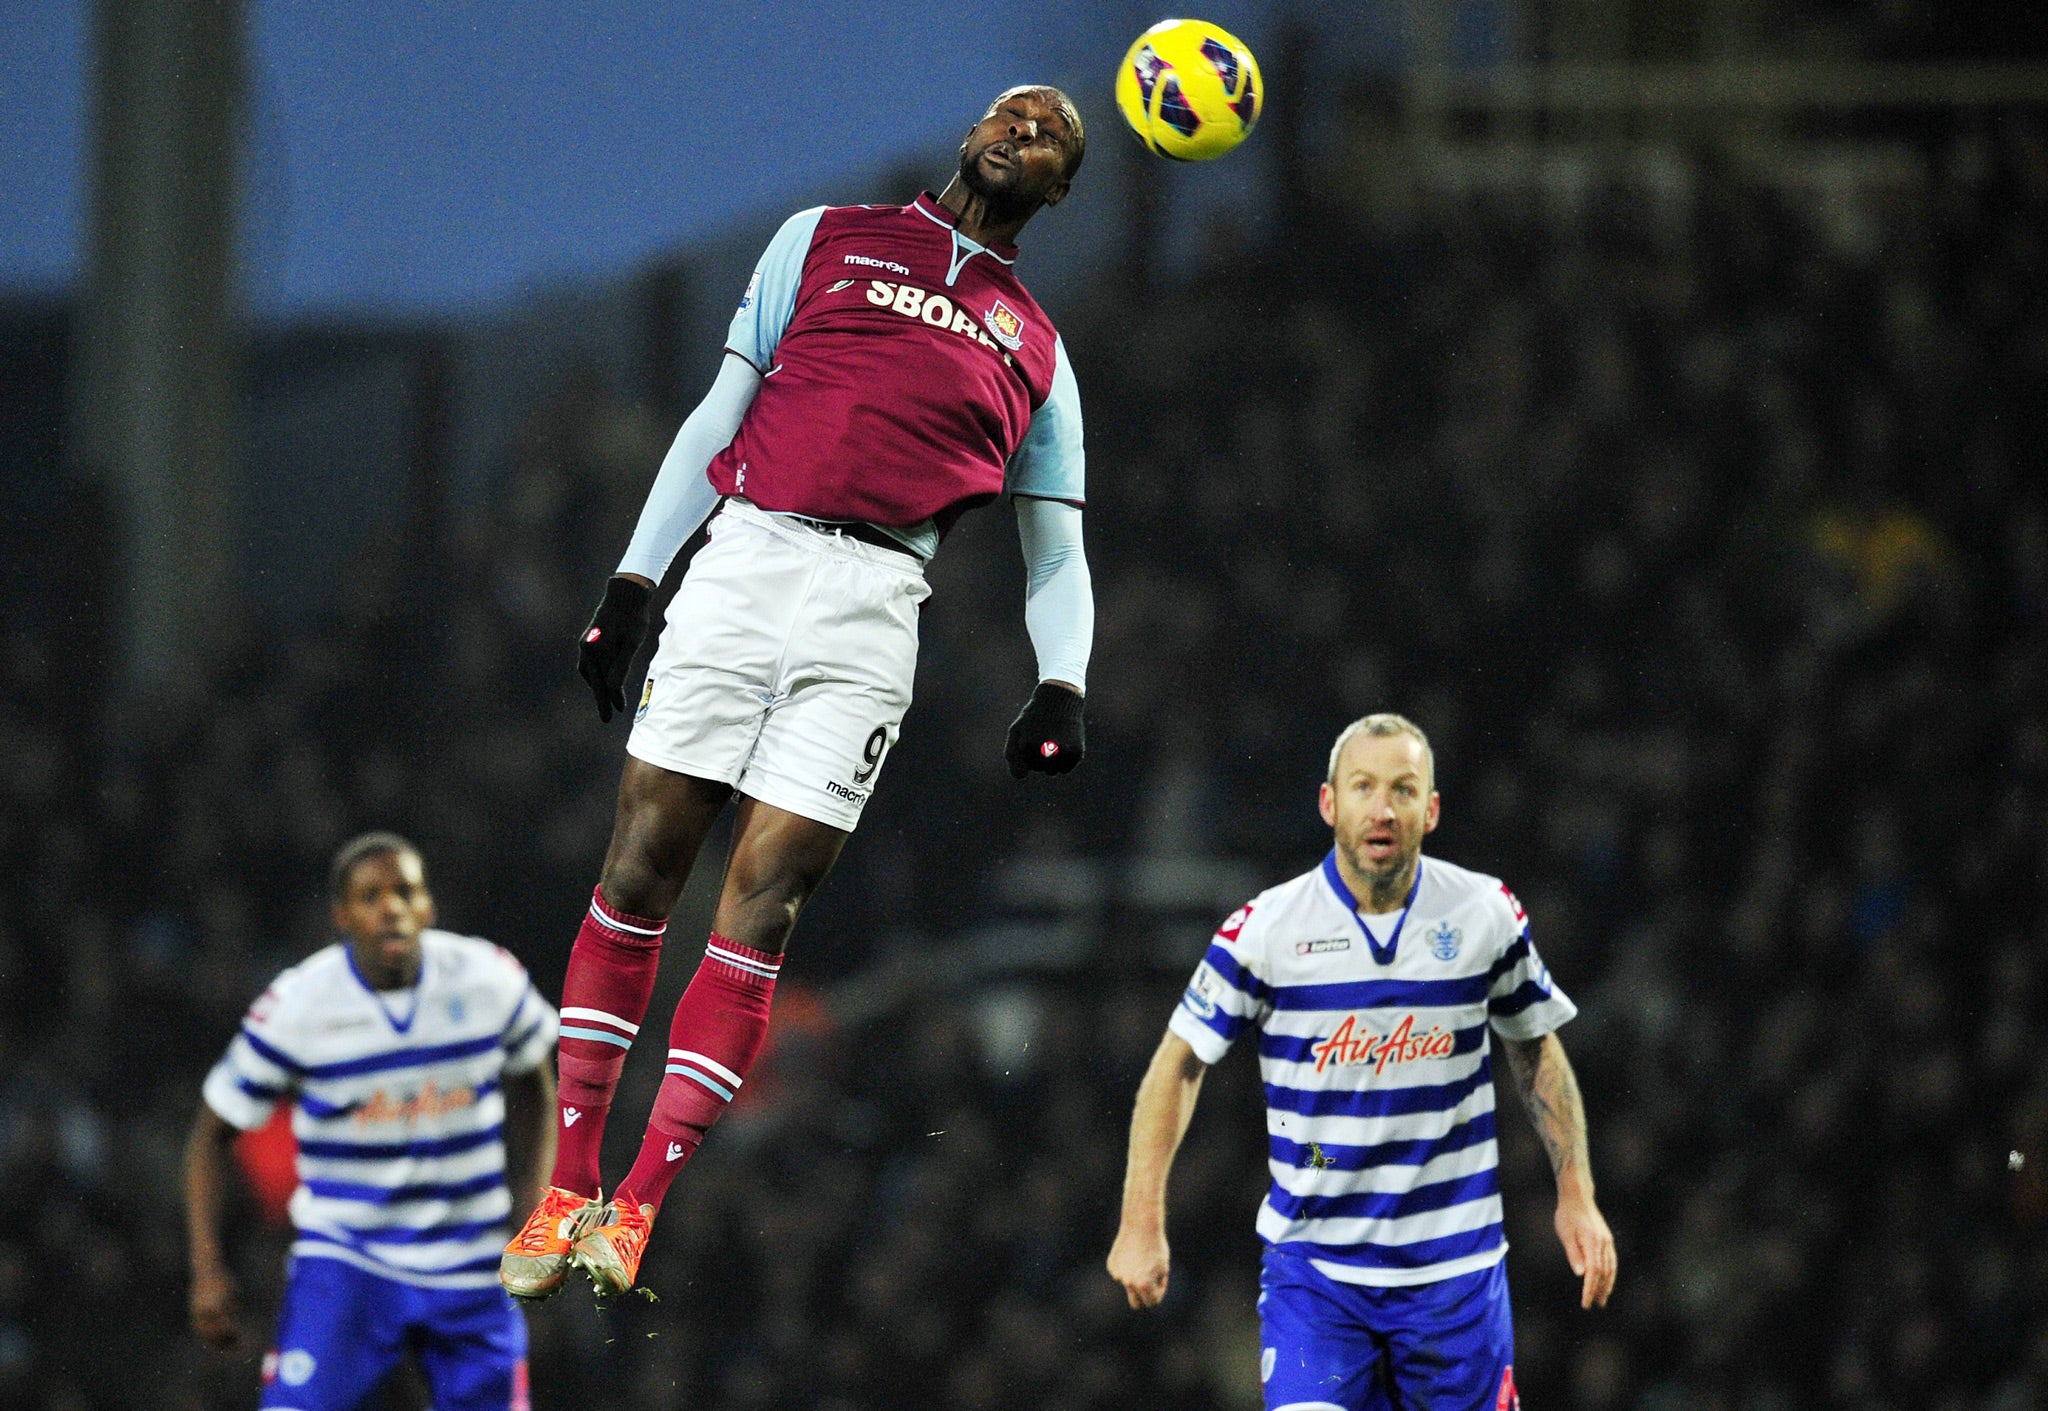 Carlton Cole in action for West Ham against Reading